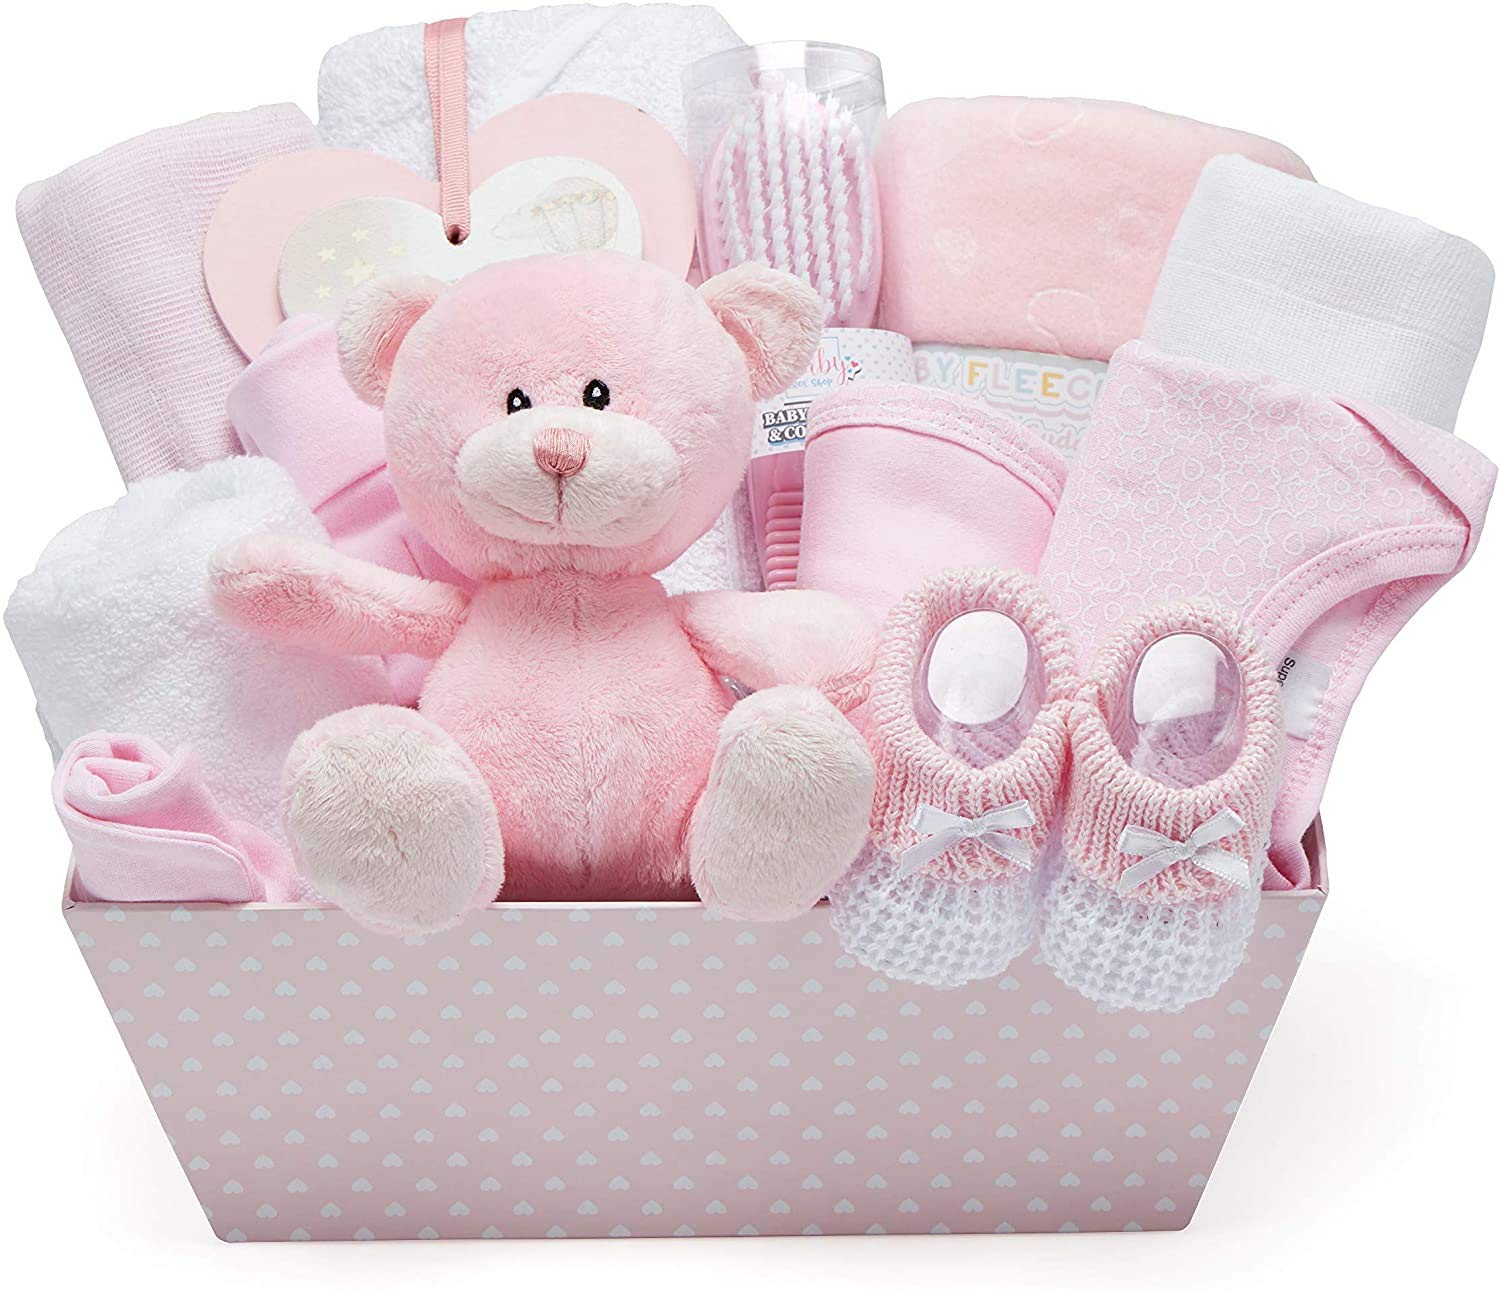 The Welcome Newborn Baby Girl Celebration & Gift Basket - champagne gift  baskets - USA delivery